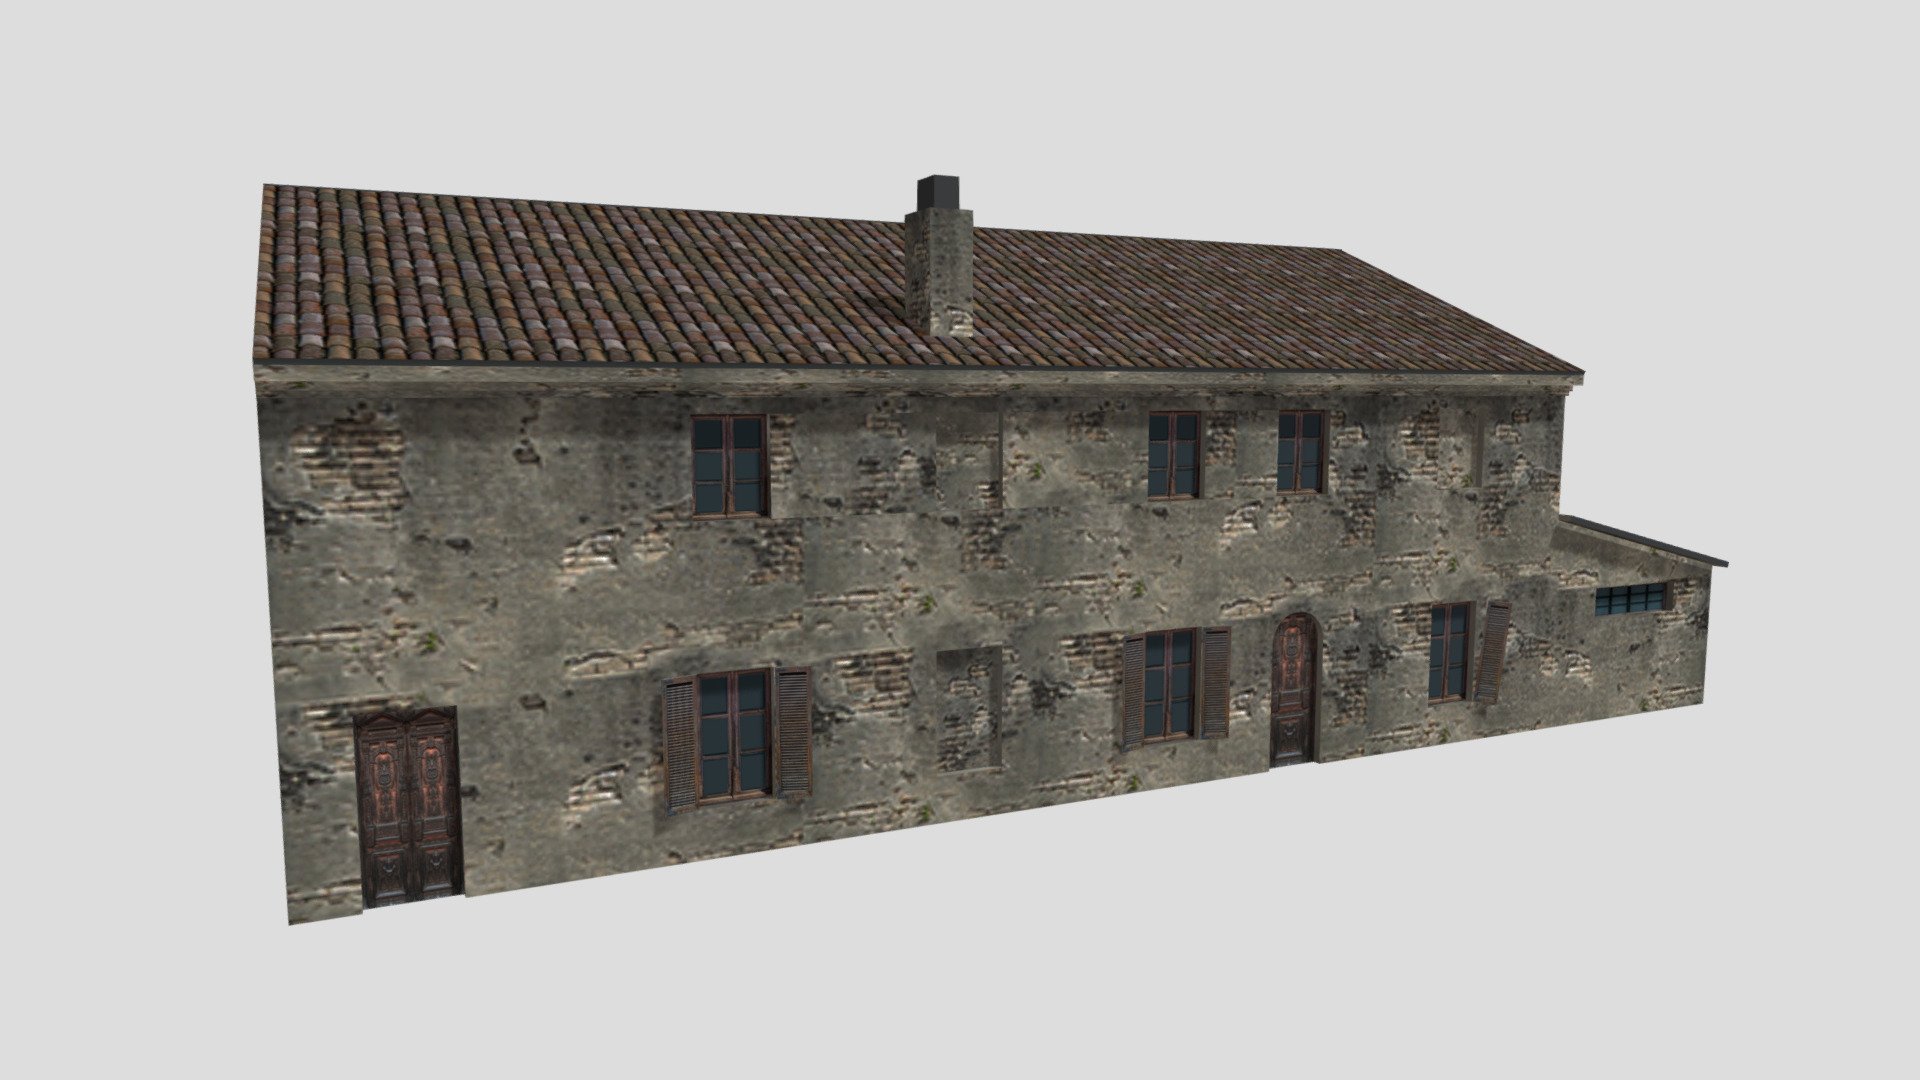 Low Poly model, Game Ready, UV Mapped
Texture Maps: d, s, i, n
Typical abandoned country house found in the Italian countryside

For information or for the creation of customized models upon request, contact the Facebook page https://www.facebook.com/3dLowPolyModels - Italian abandoned country cottage - 3D model by CSModels 3d model